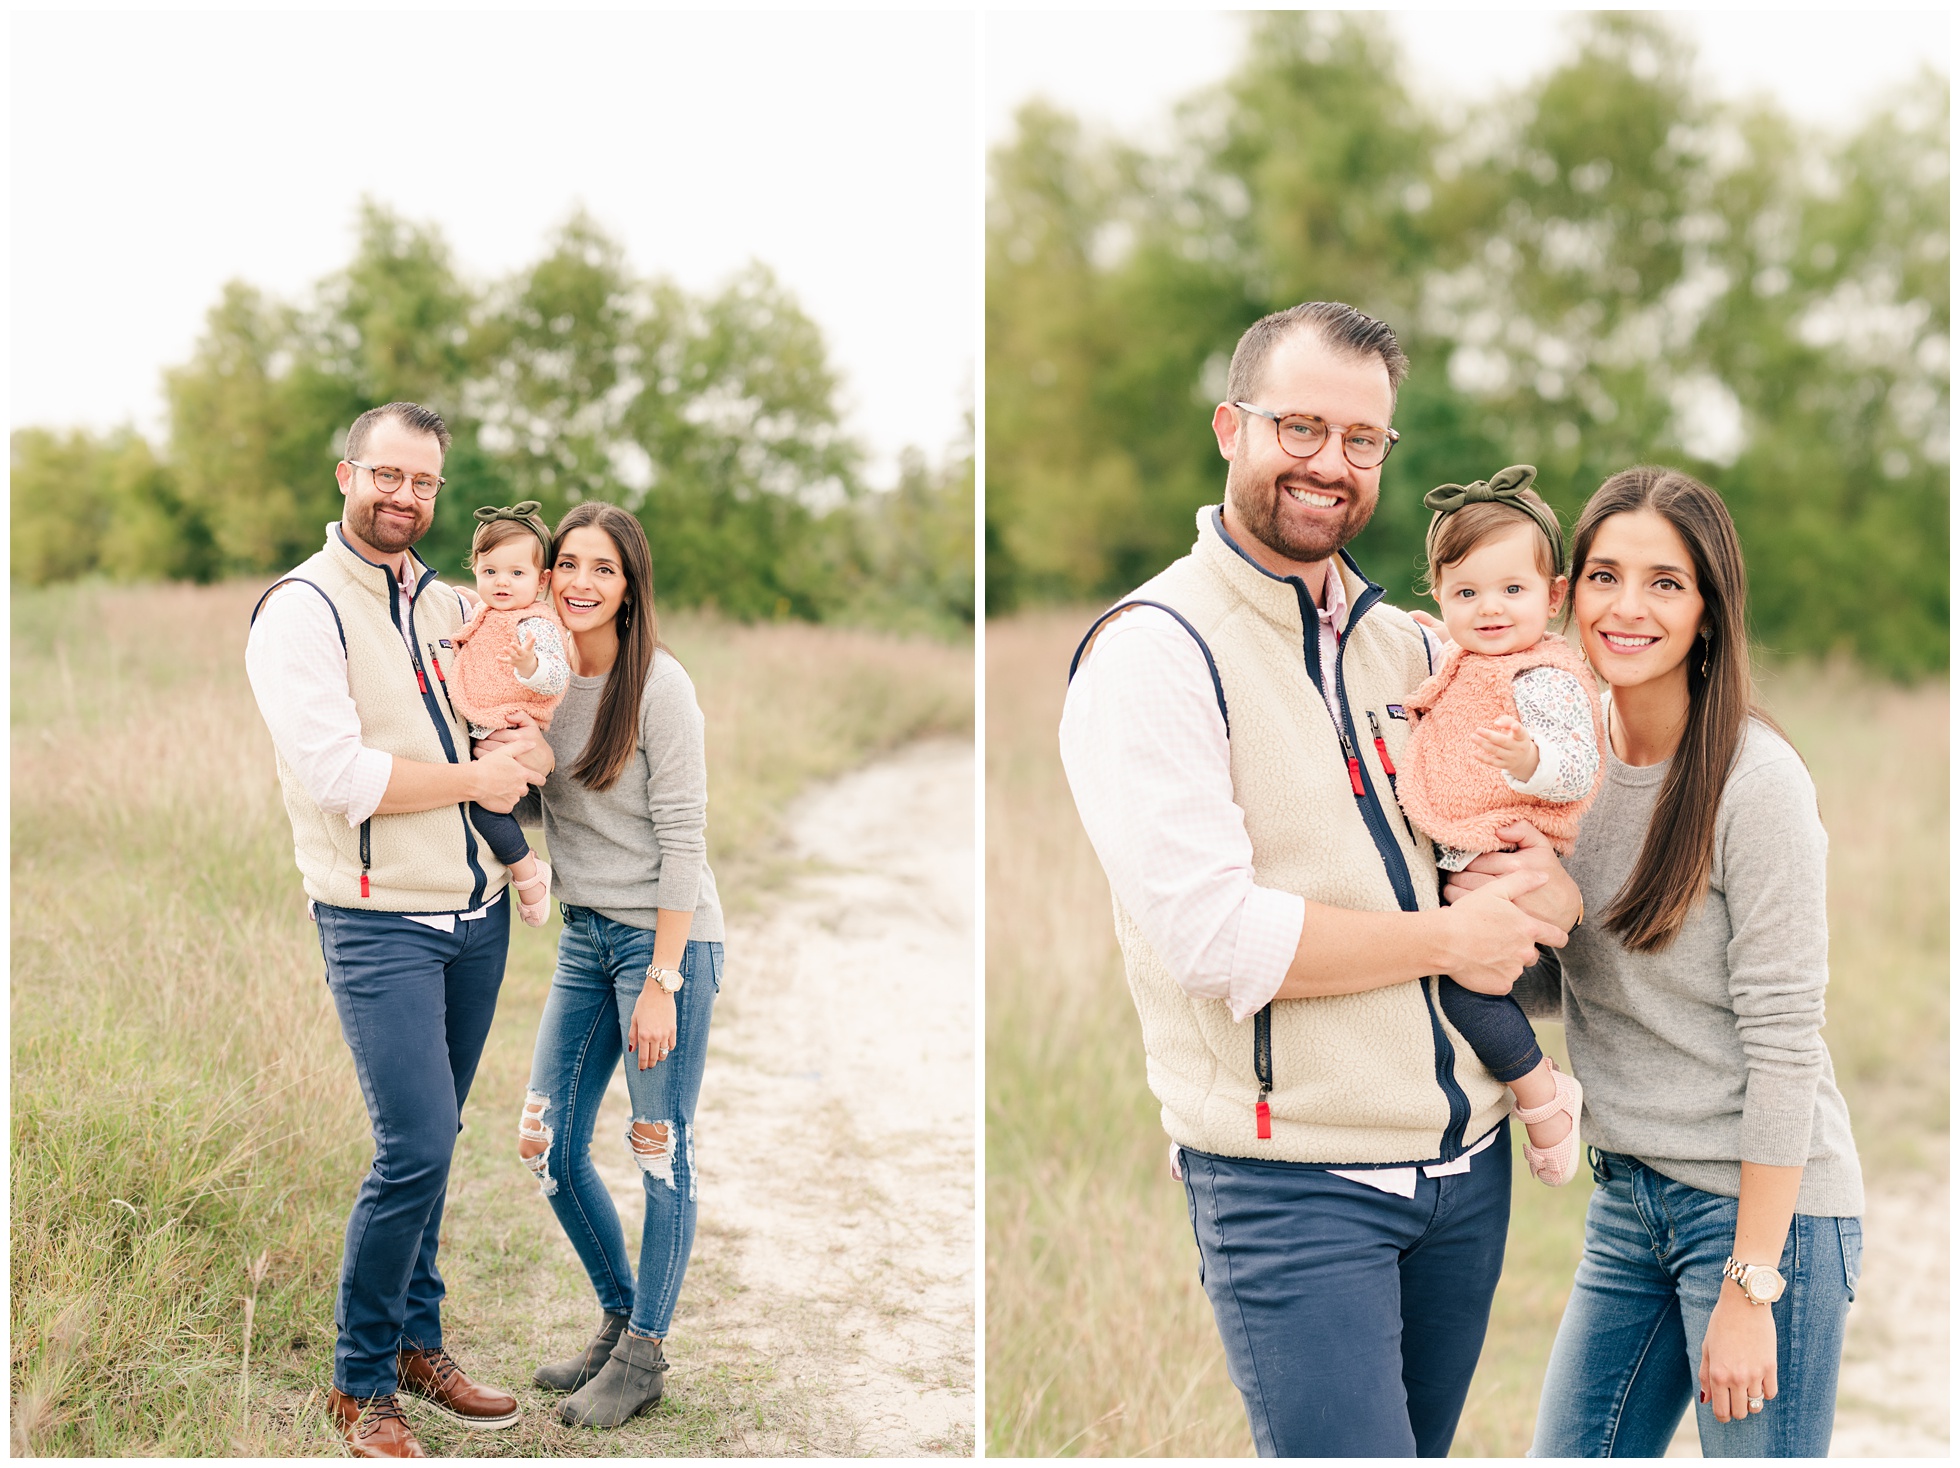 Family Photography at a natural outdoor location in The Woodlands TX